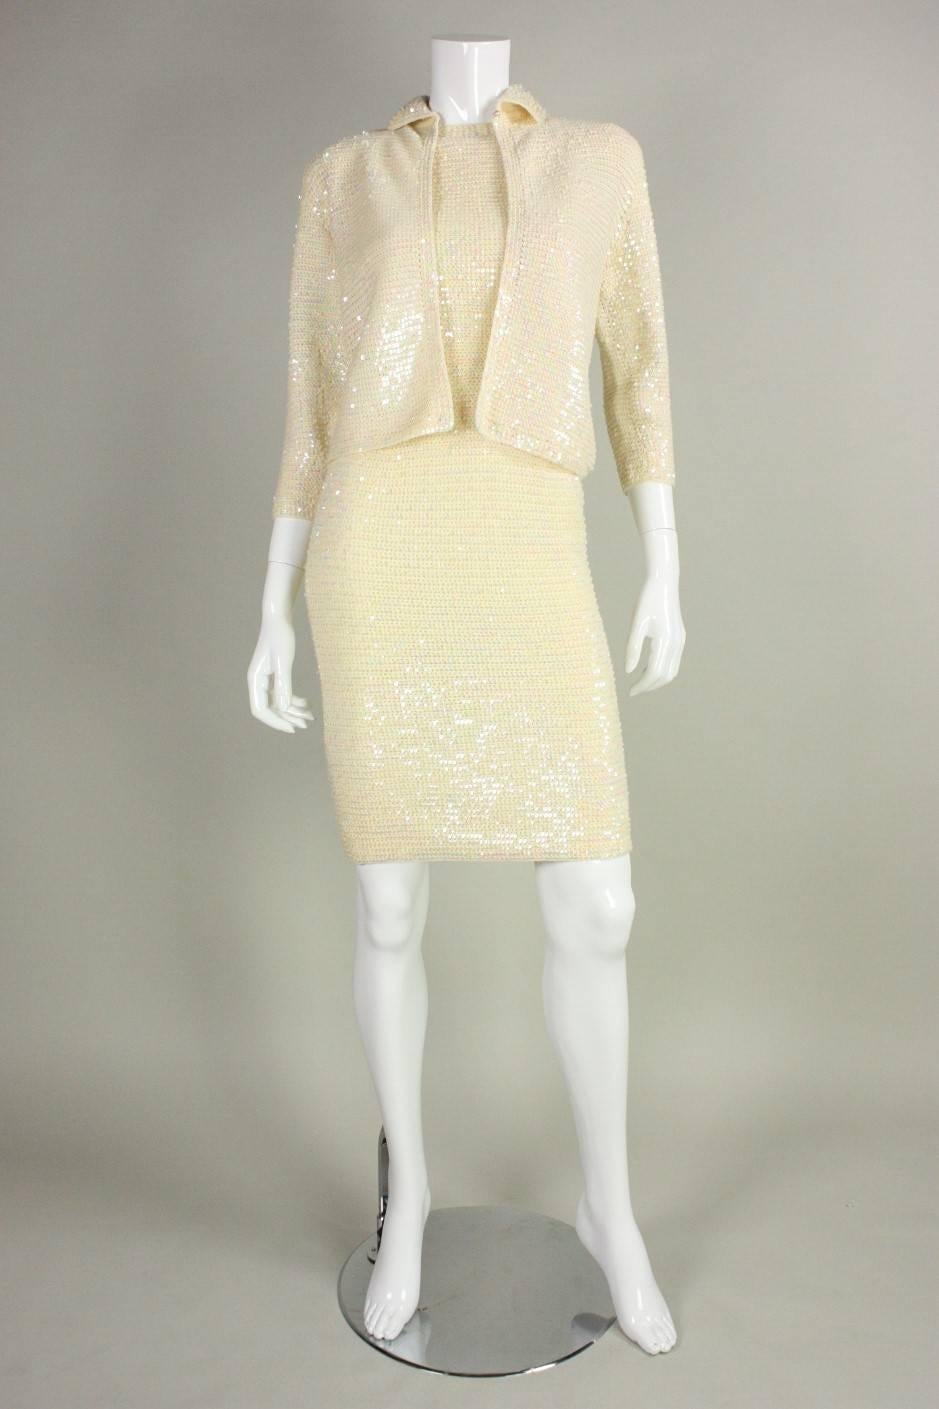 Vintage dress and sweater ensemble was made by Italian designer Anna Giovannozzi and features a cream knit ground that is completely covered with iridescent sequins.  Sleeveless dress has round neck and is fitted throughout.  Waist-length sweater